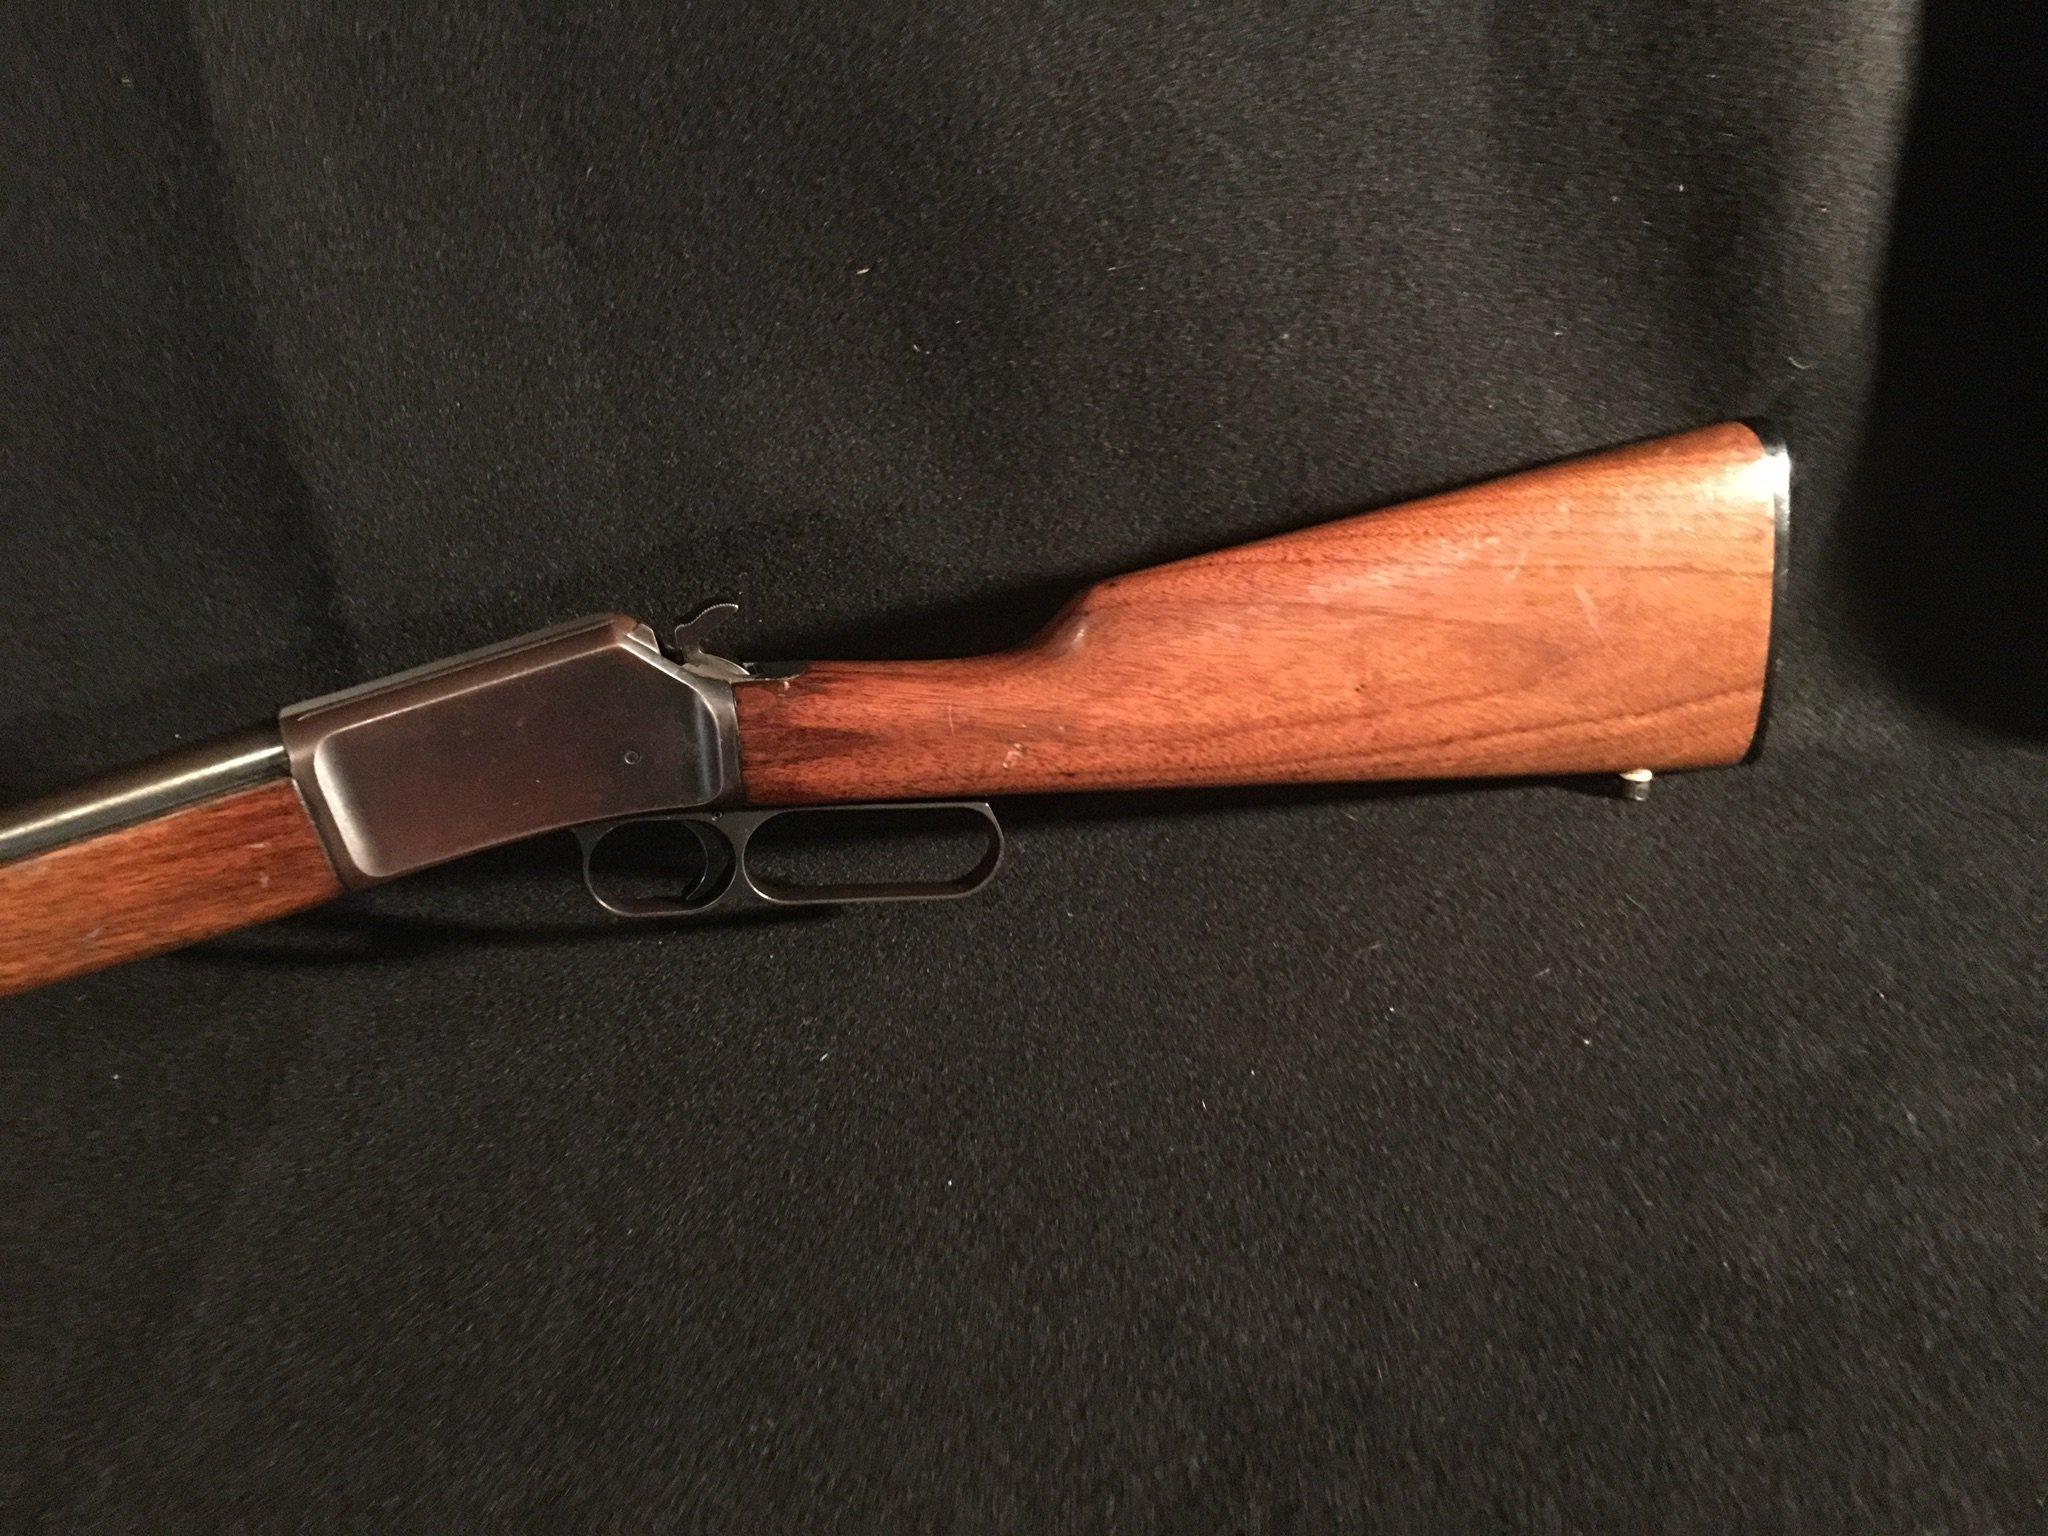 Browning BL-22